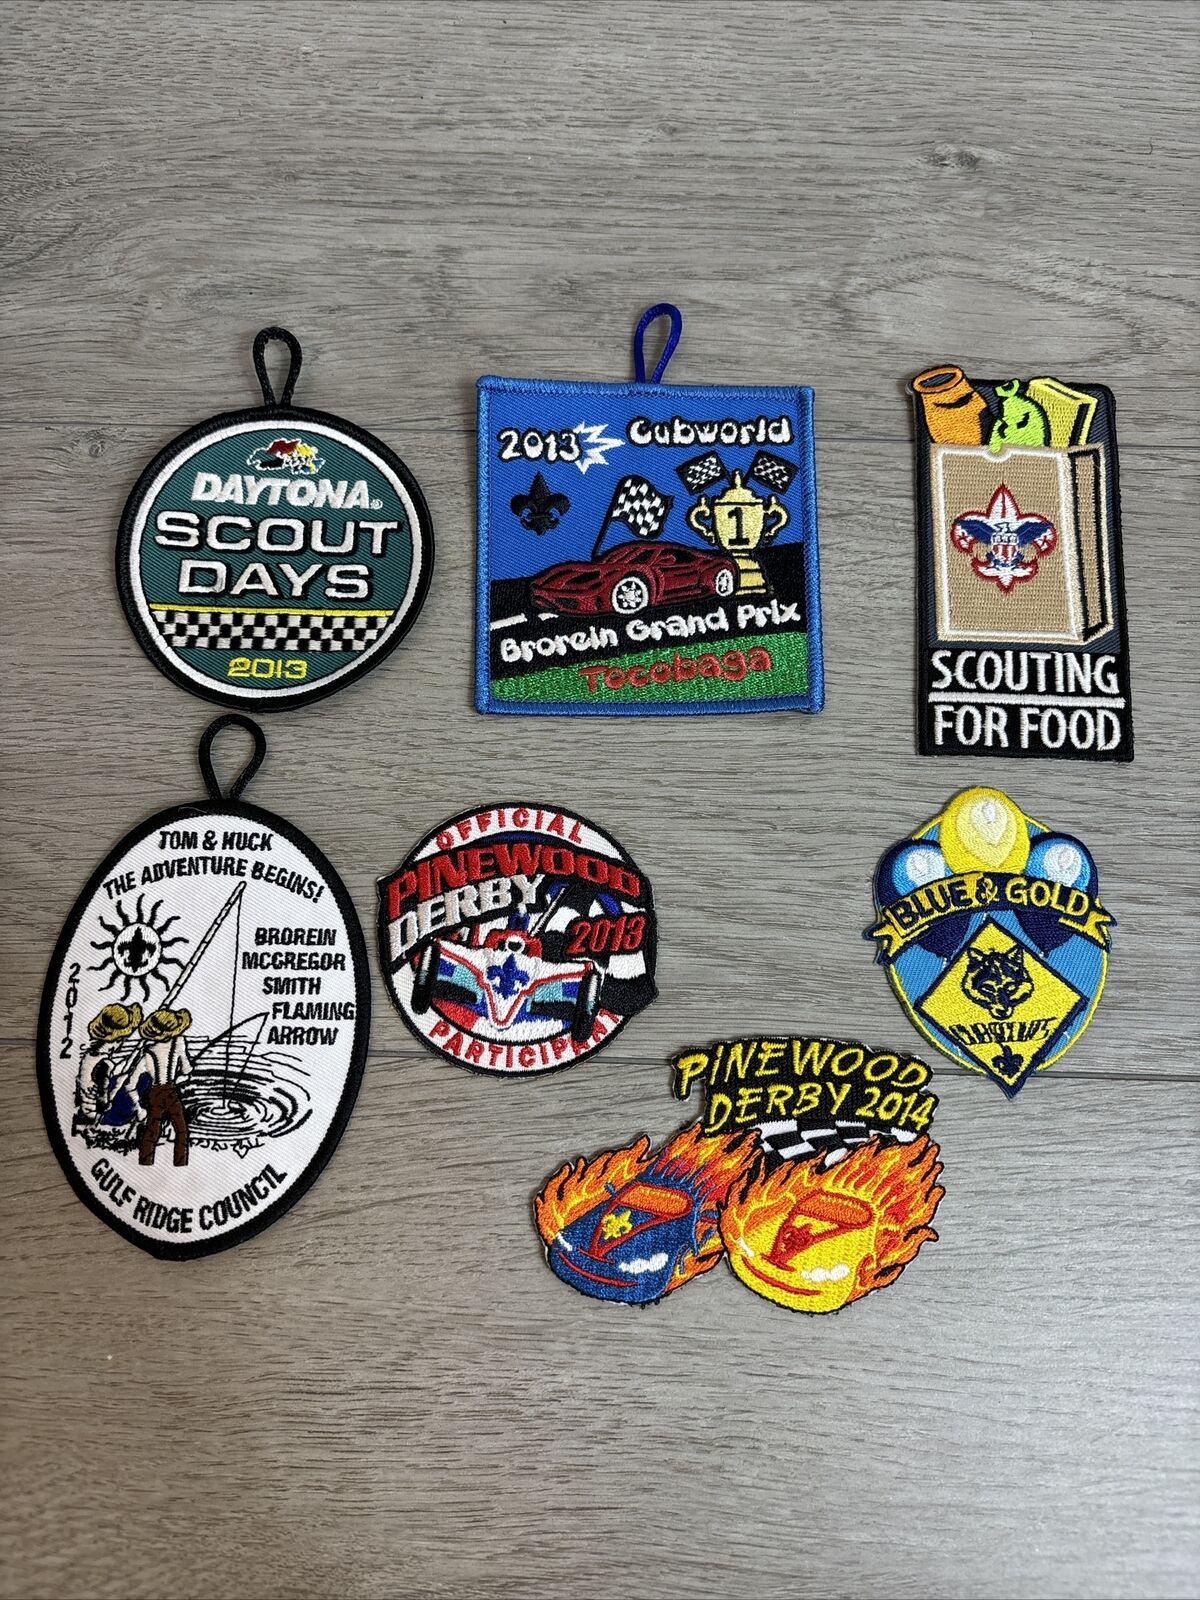 BSA Boy Scout patches lot of 7 Including Daytona Scout Days 2013 Pinewood 2014